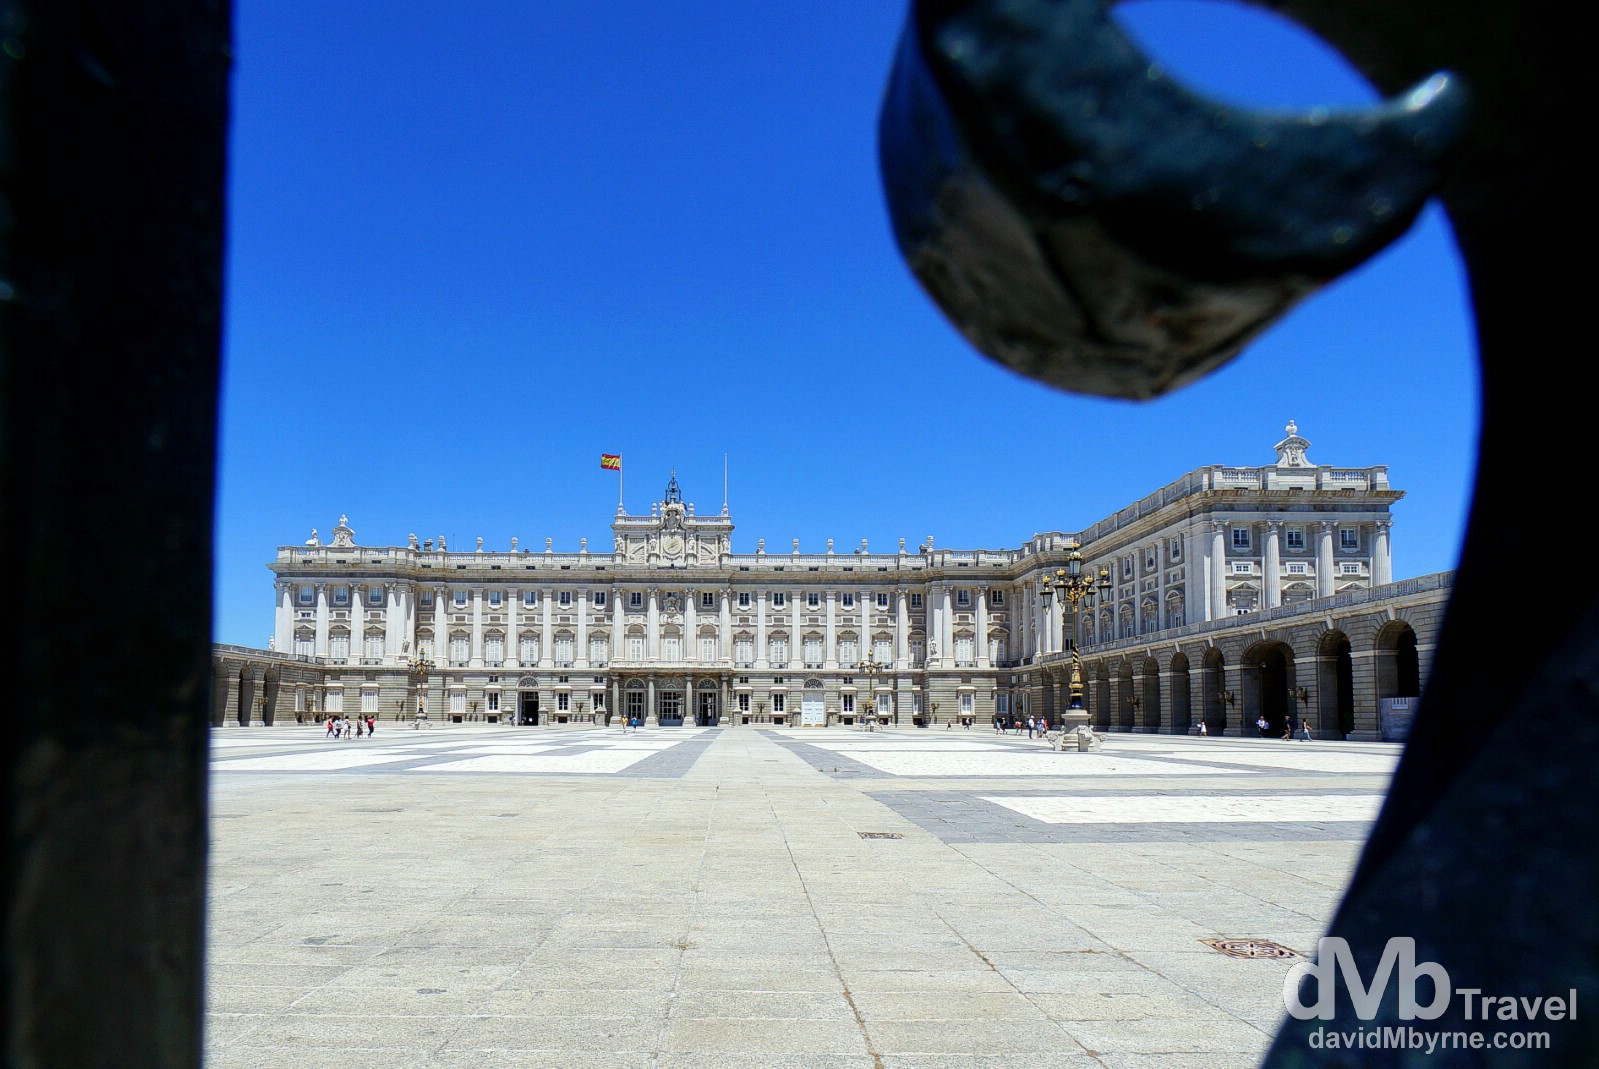 A section of the Palacio Real (the Royal Palace) as seen through railings in Madrid, Spain. June 15th, 2014. 